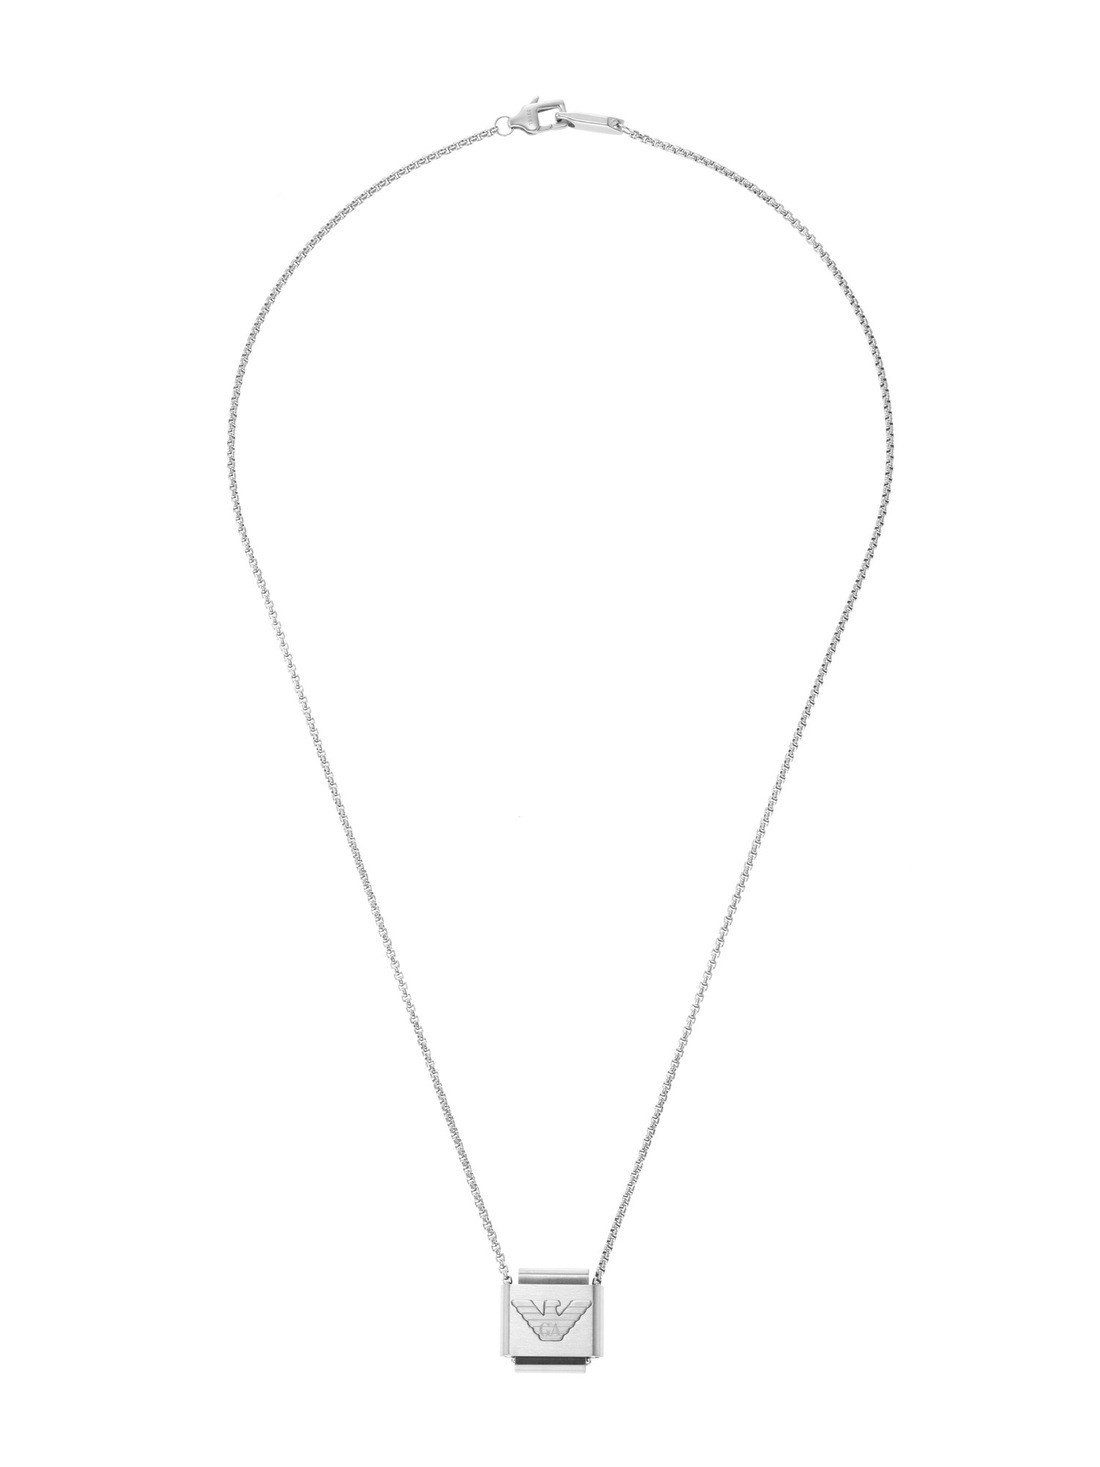 Emporio Armani Silver Necklace EGS2915040 - Watch Station India